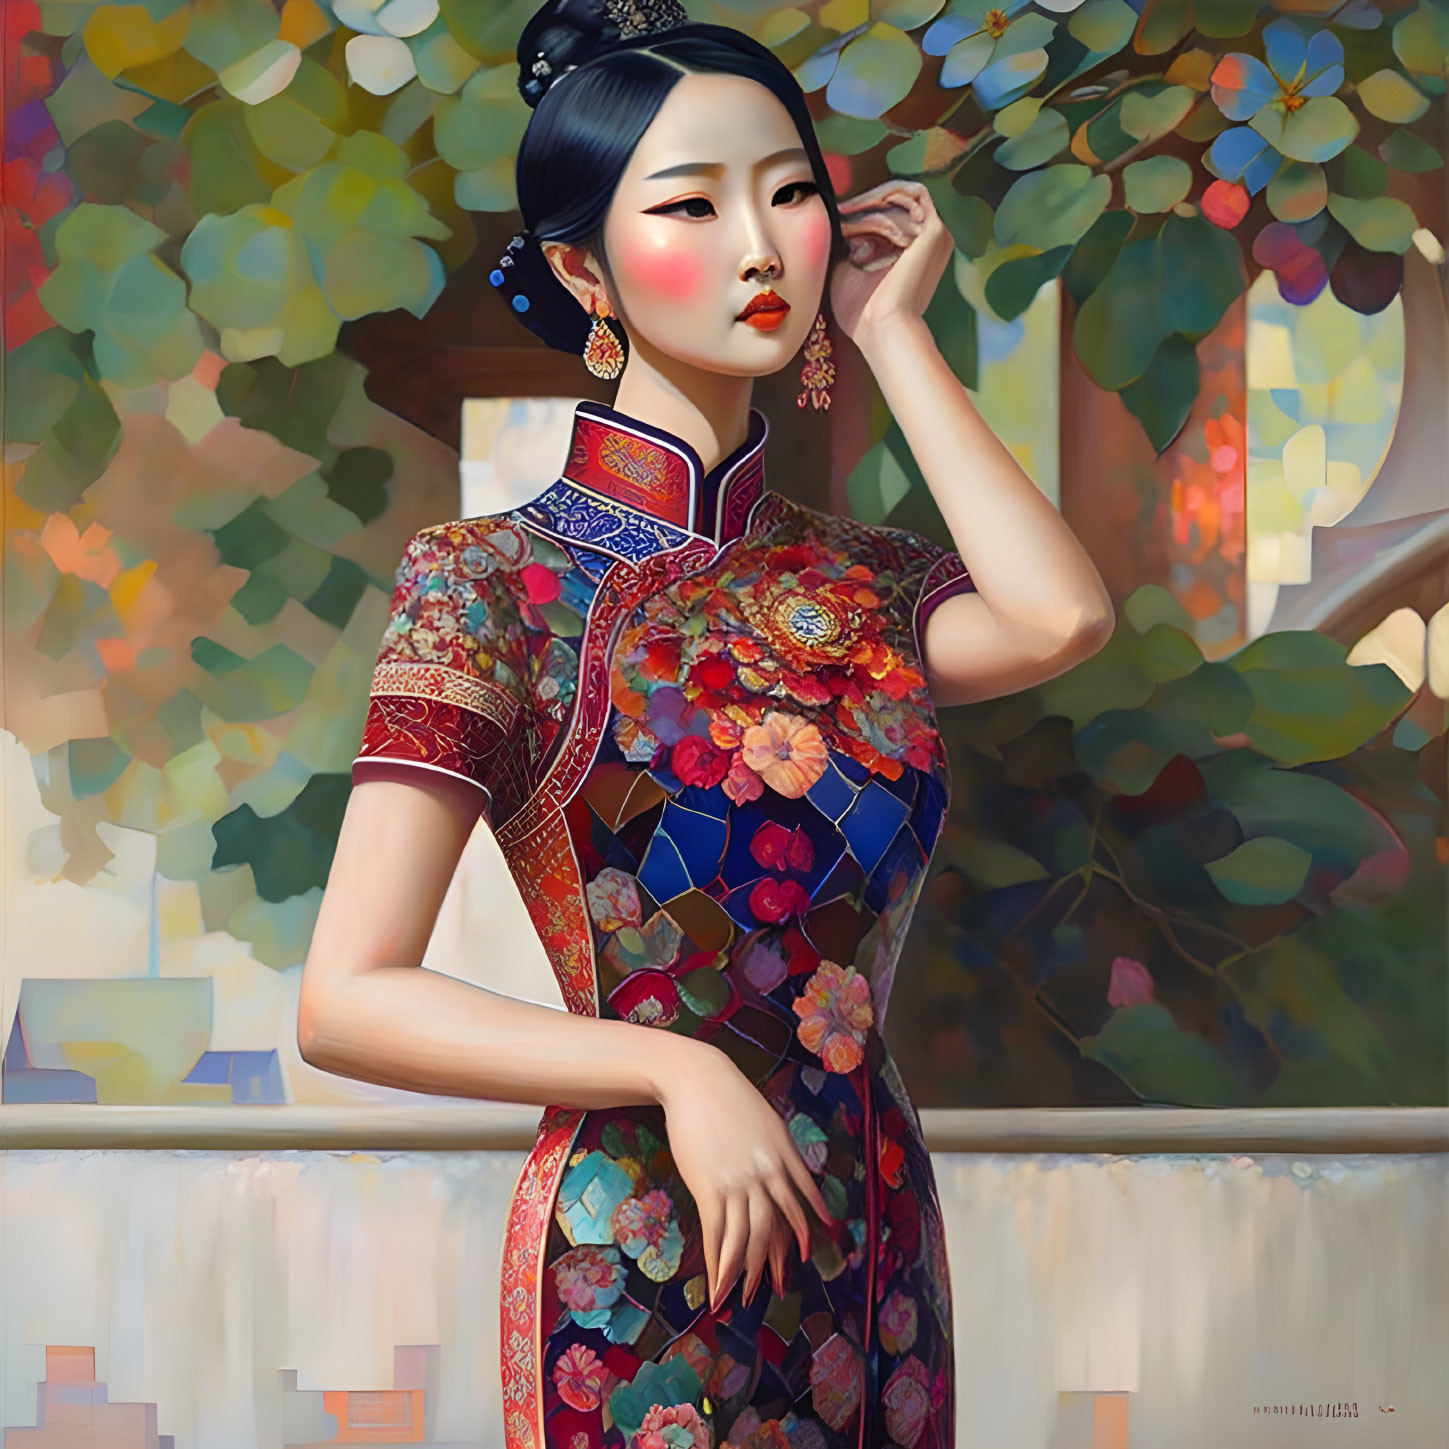 Elegant woman in vibrant floral qipao against colorful background